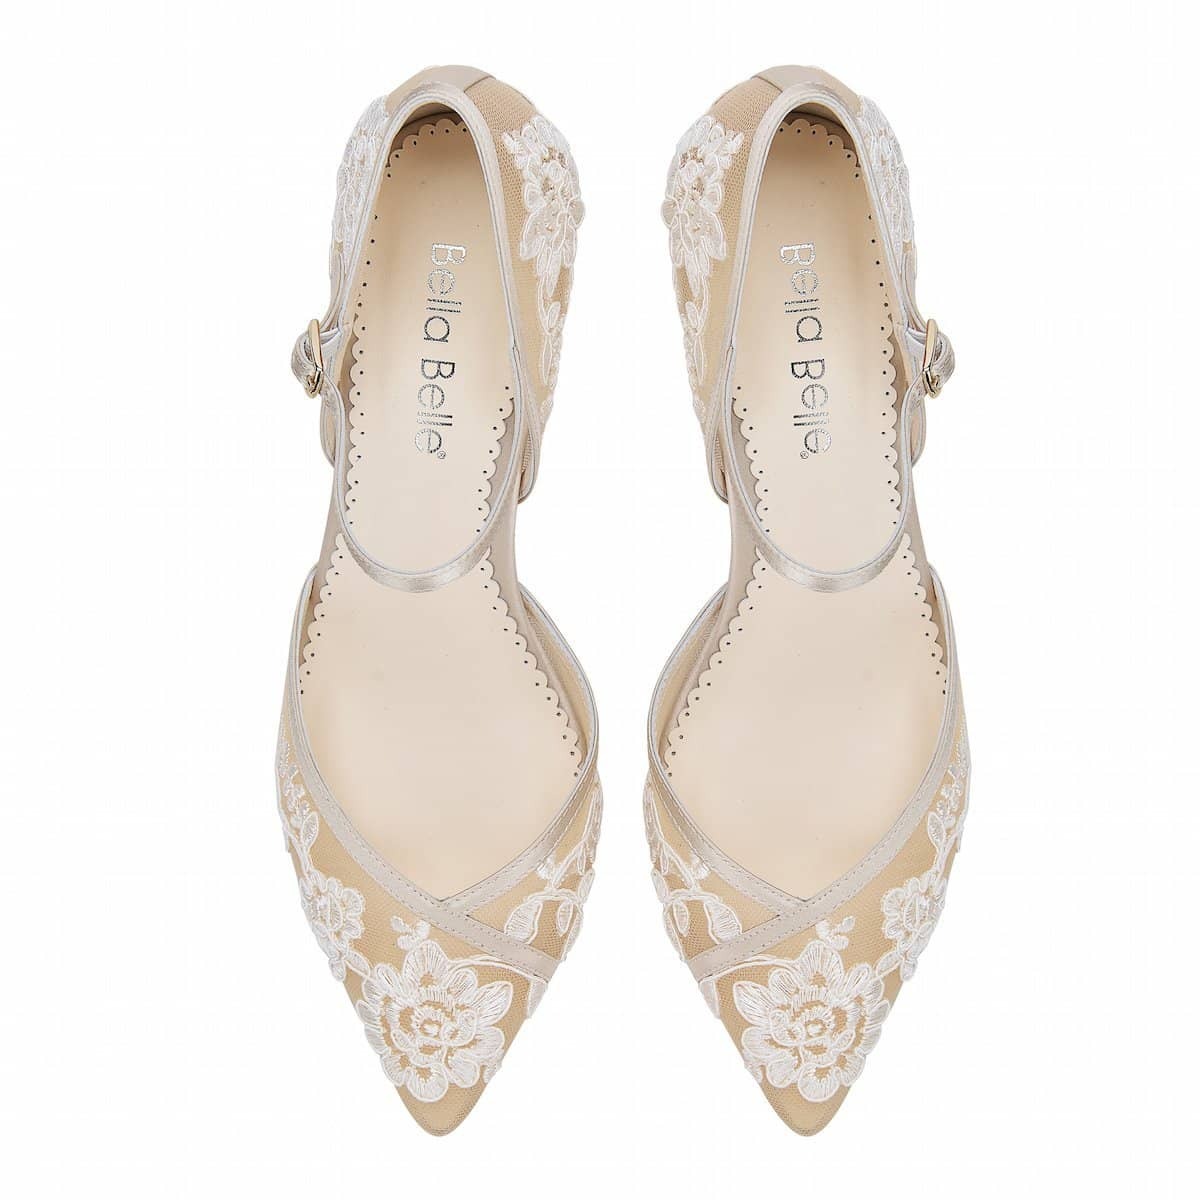 Candice Lace Wedding Heels in Nude Ivory by Bella Belle Shoes